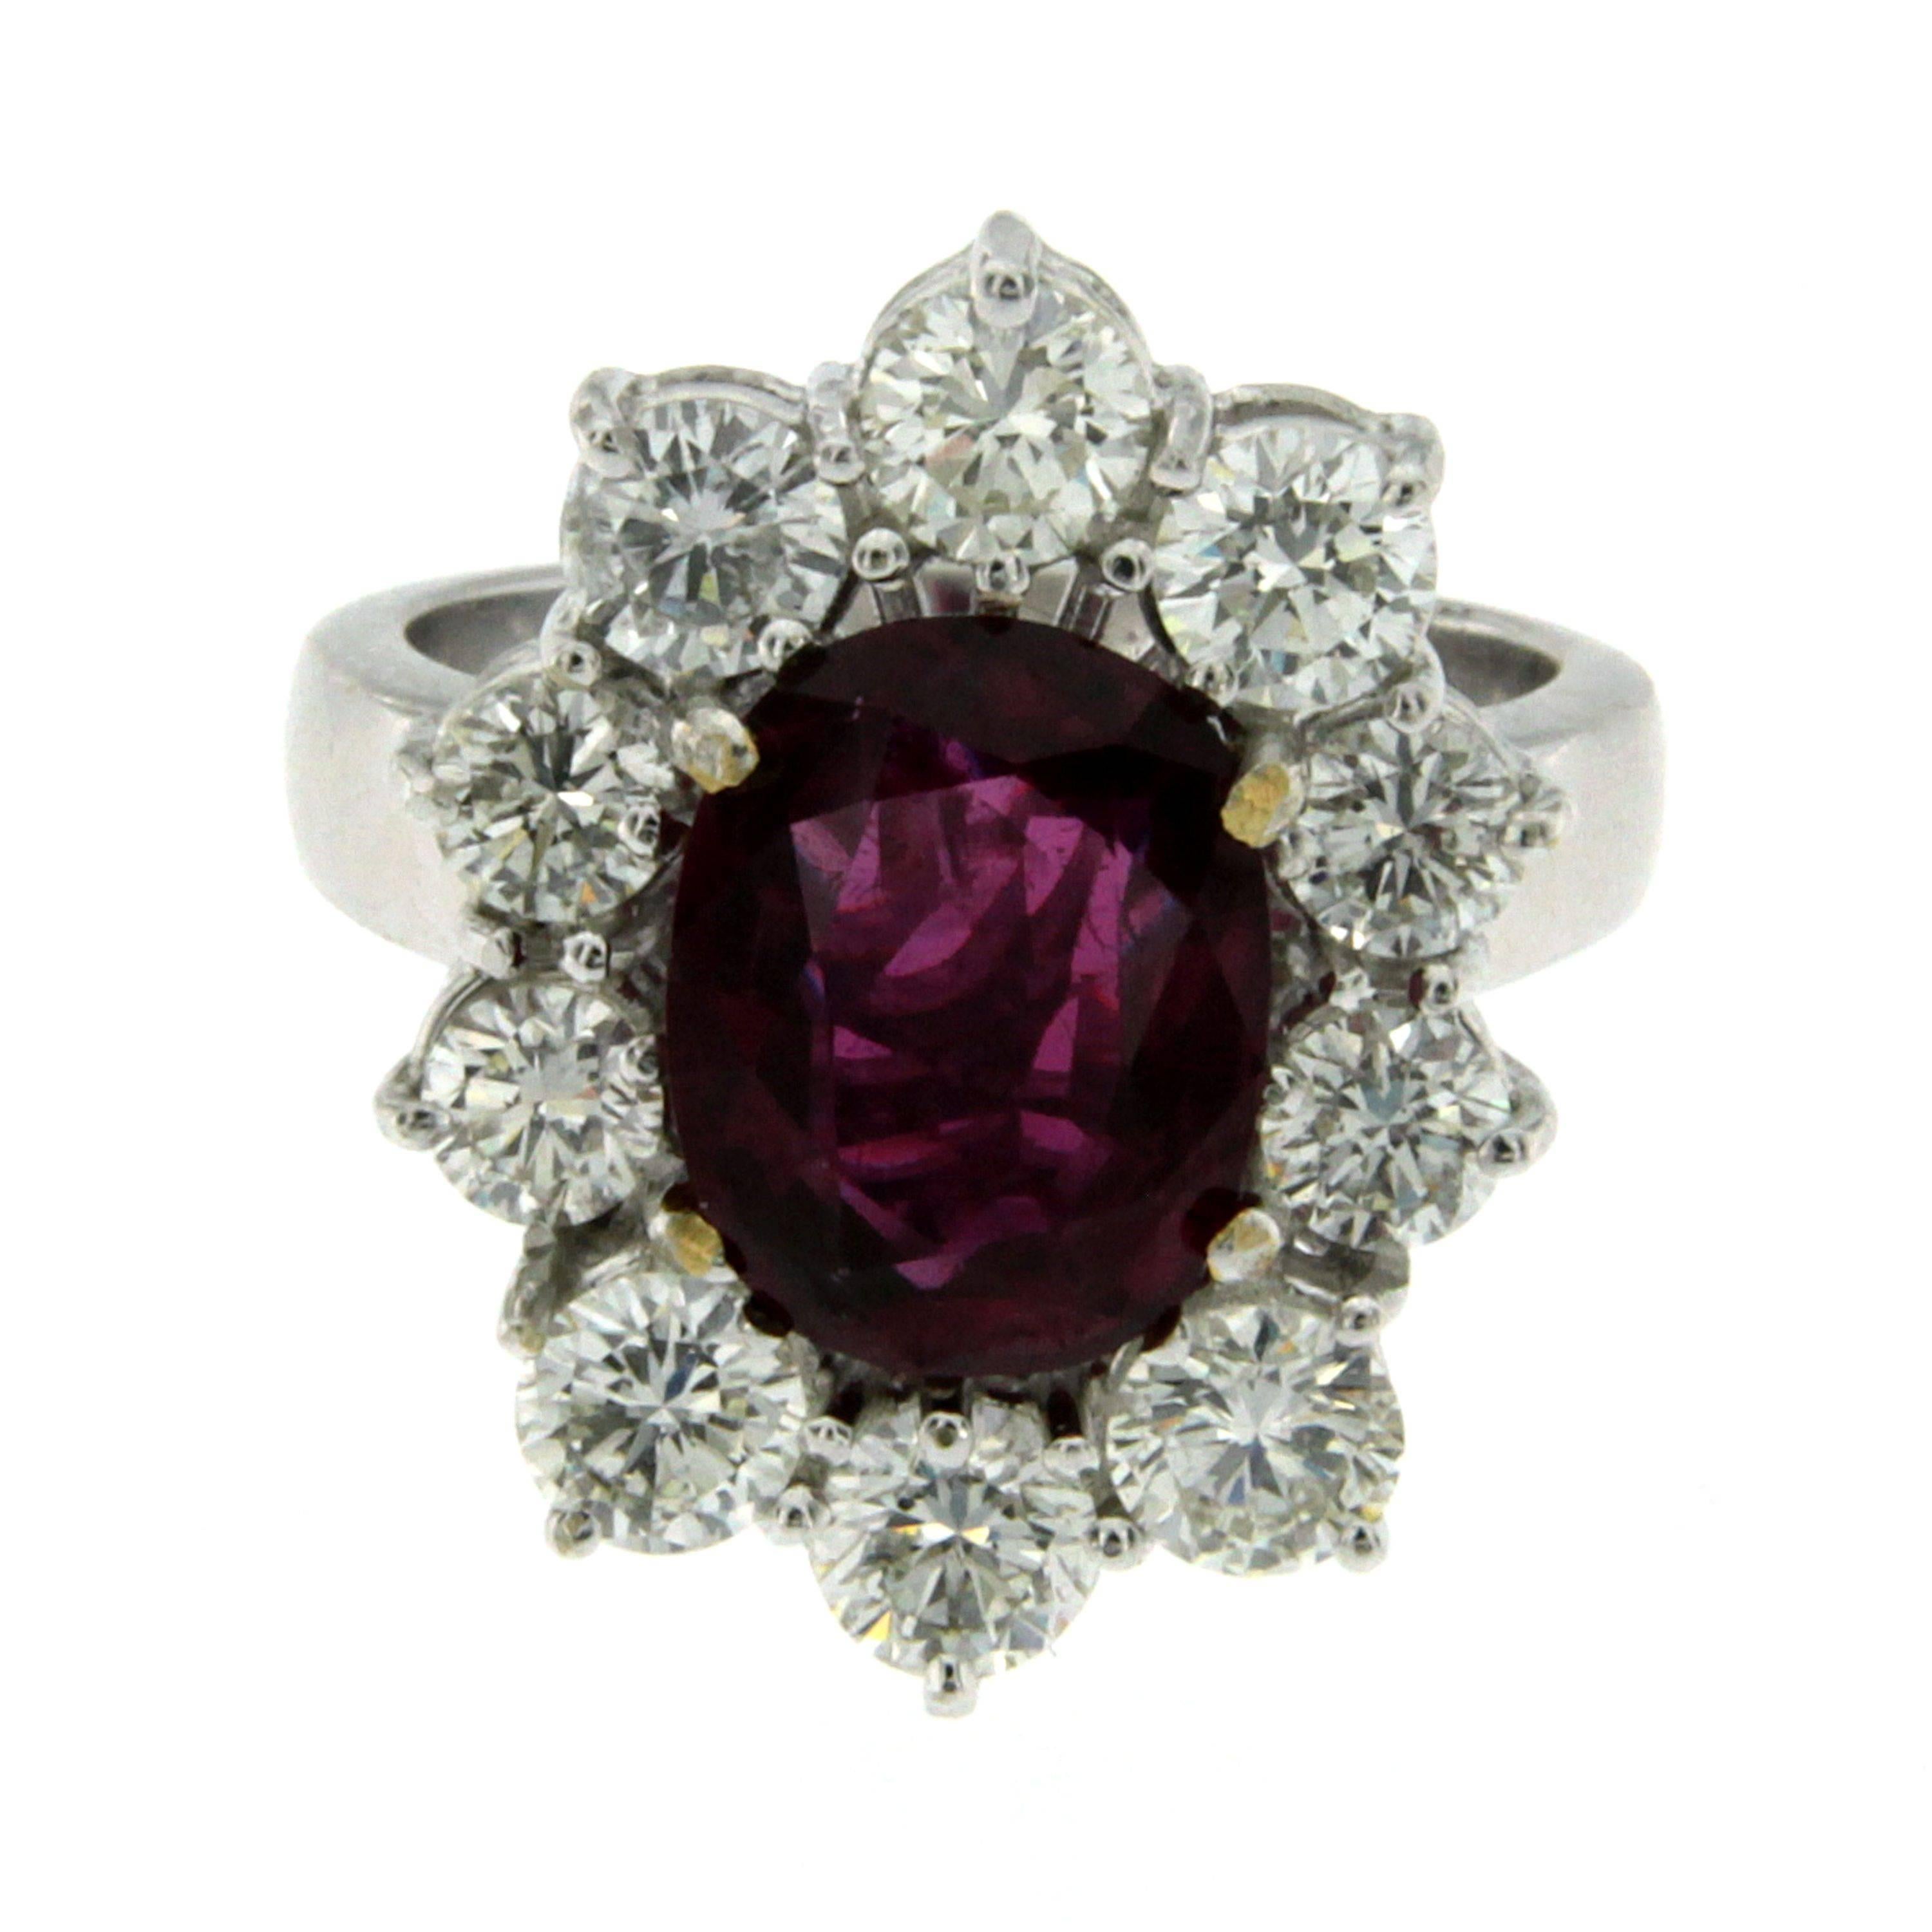 This beautiful 18k white Gold cluster ring features a 3.81 Carat oval-cut Ruby, origin Thailand, with a vibrant and rich purplish red color flanked by 10 round cut Diamonds for a total approx. weight of 3.00 carats color G  Vvs clarity.
The Ruby